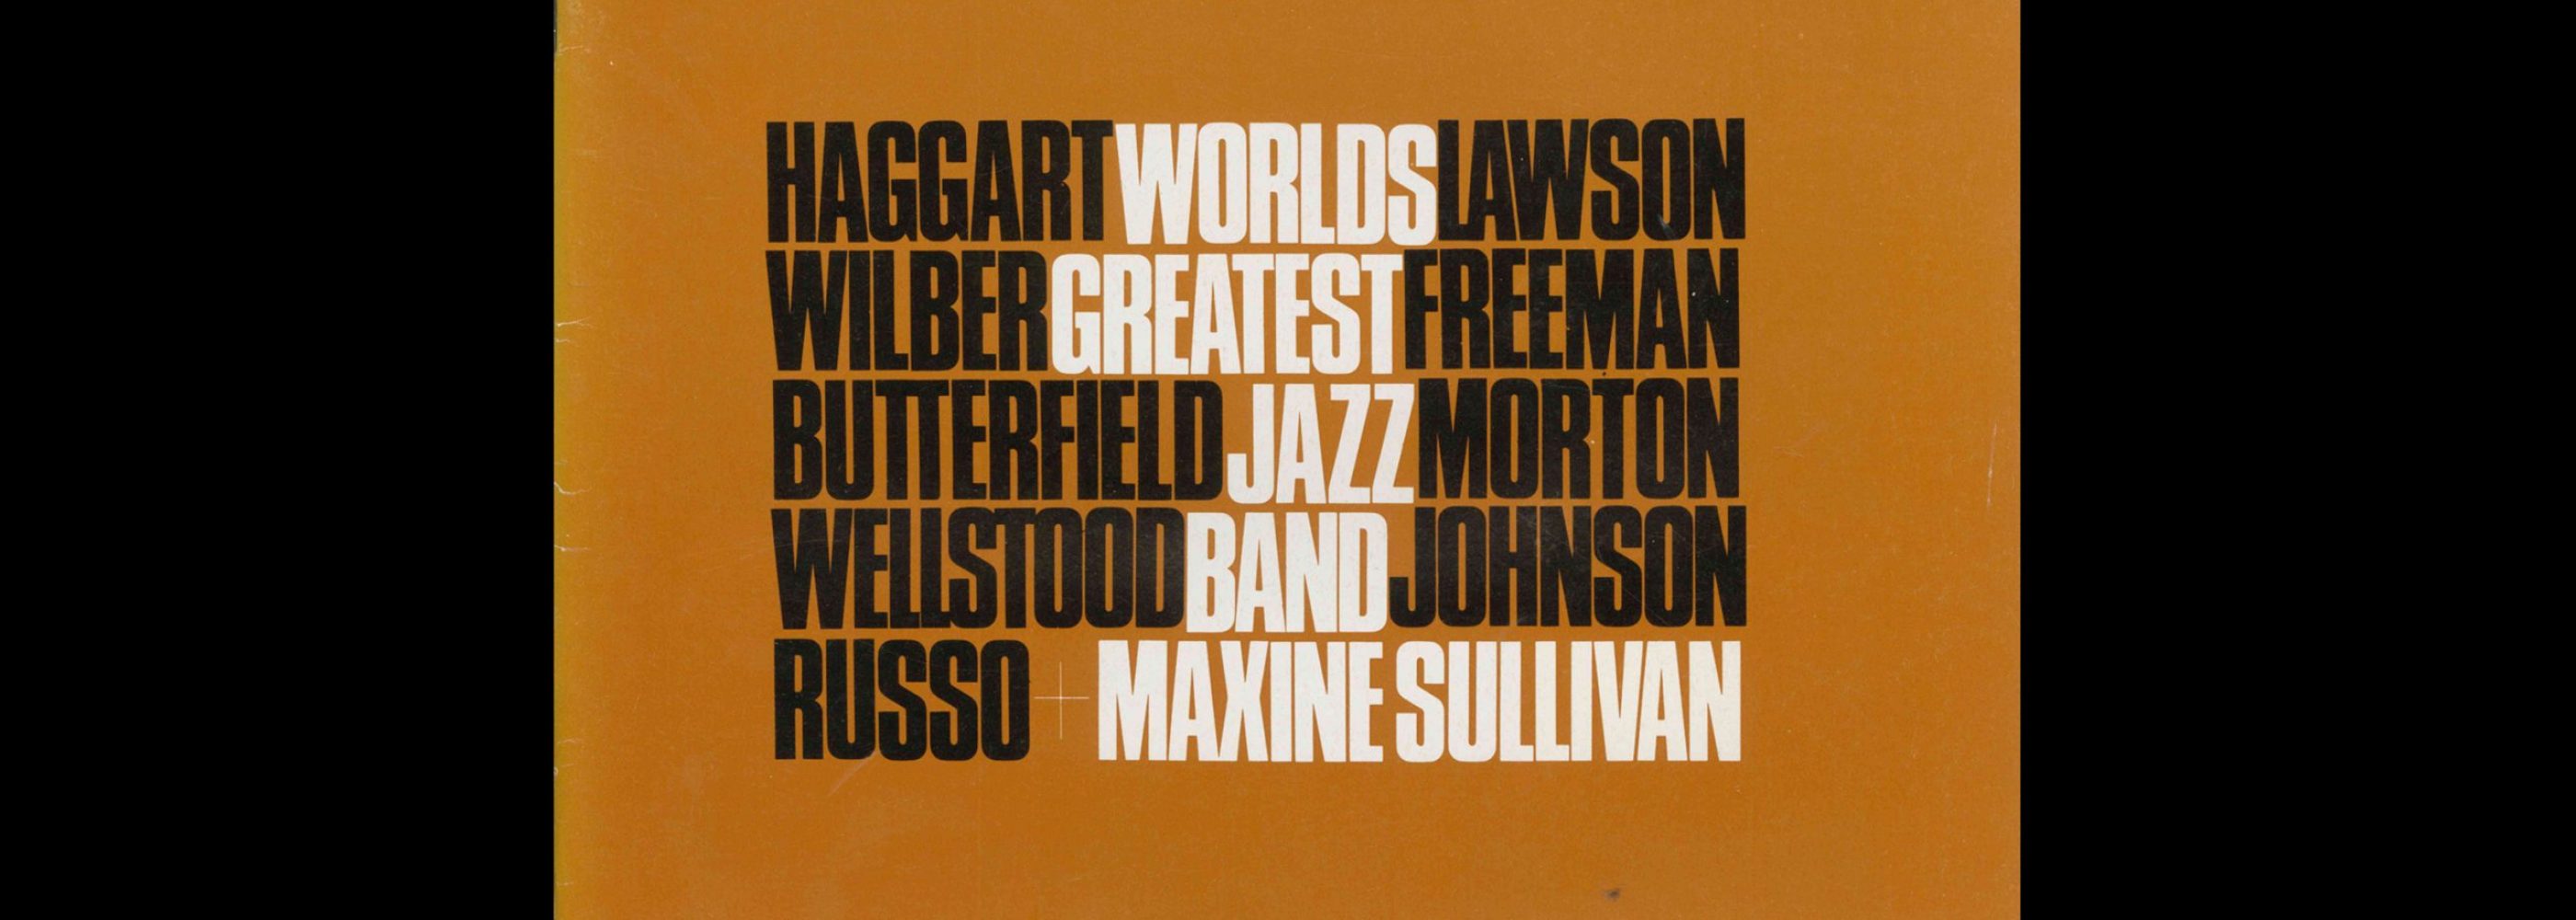 Jazz Journal, 10, 1974. Cover design by Cal Swann